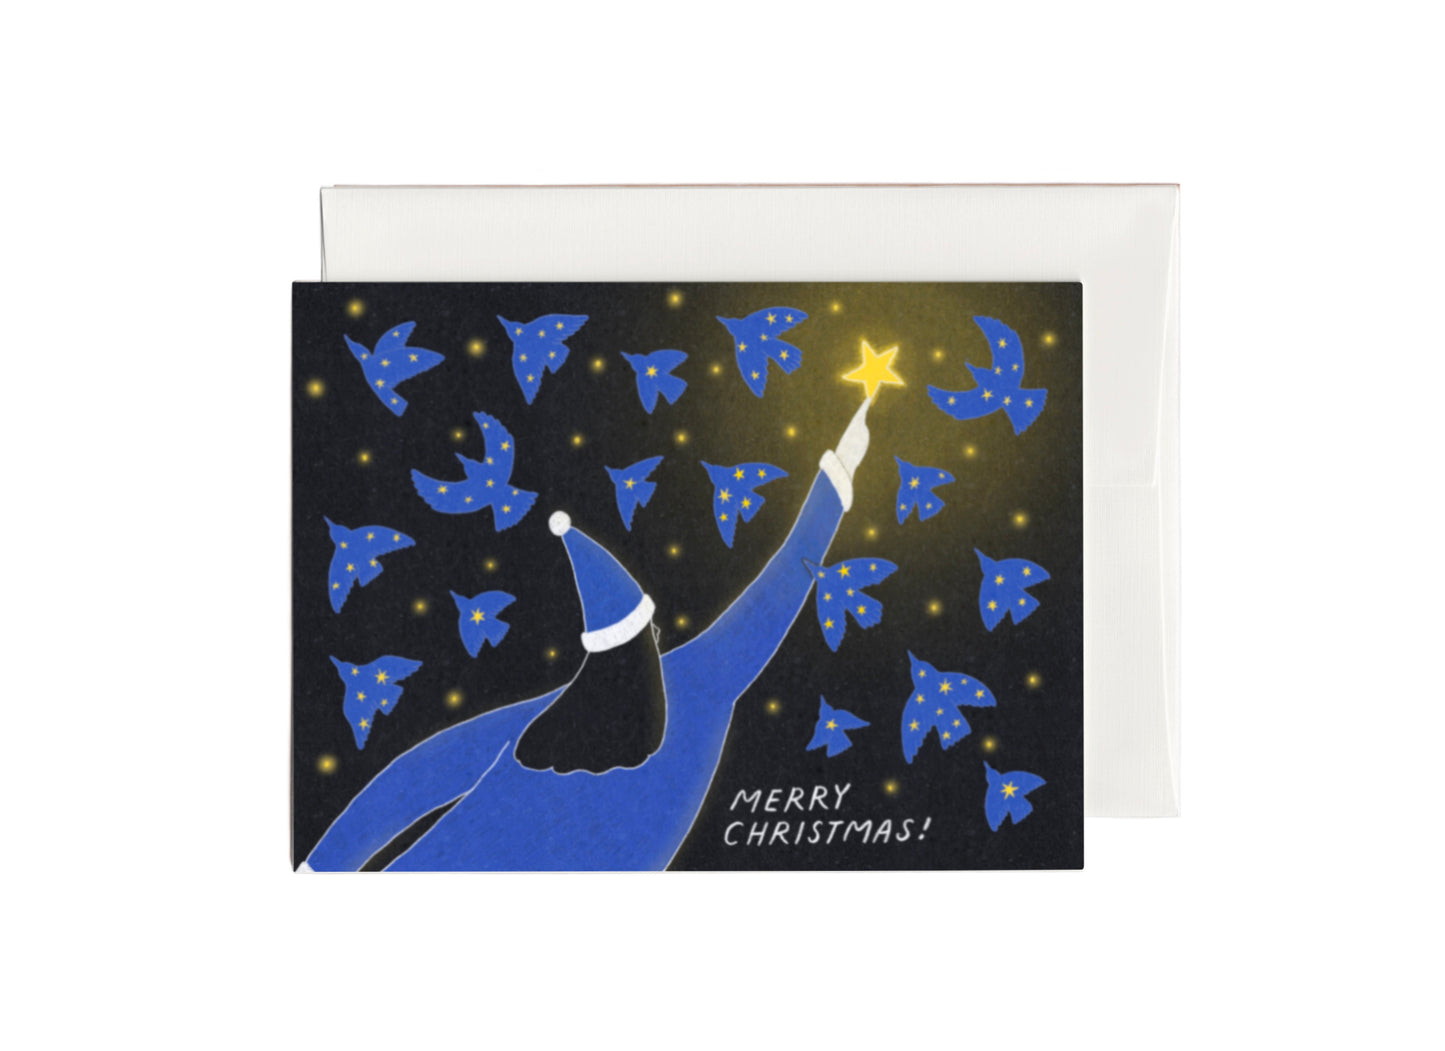 Dreamy Christmas Card with the illustration of a blue female Santa Claus reaching to a star above her